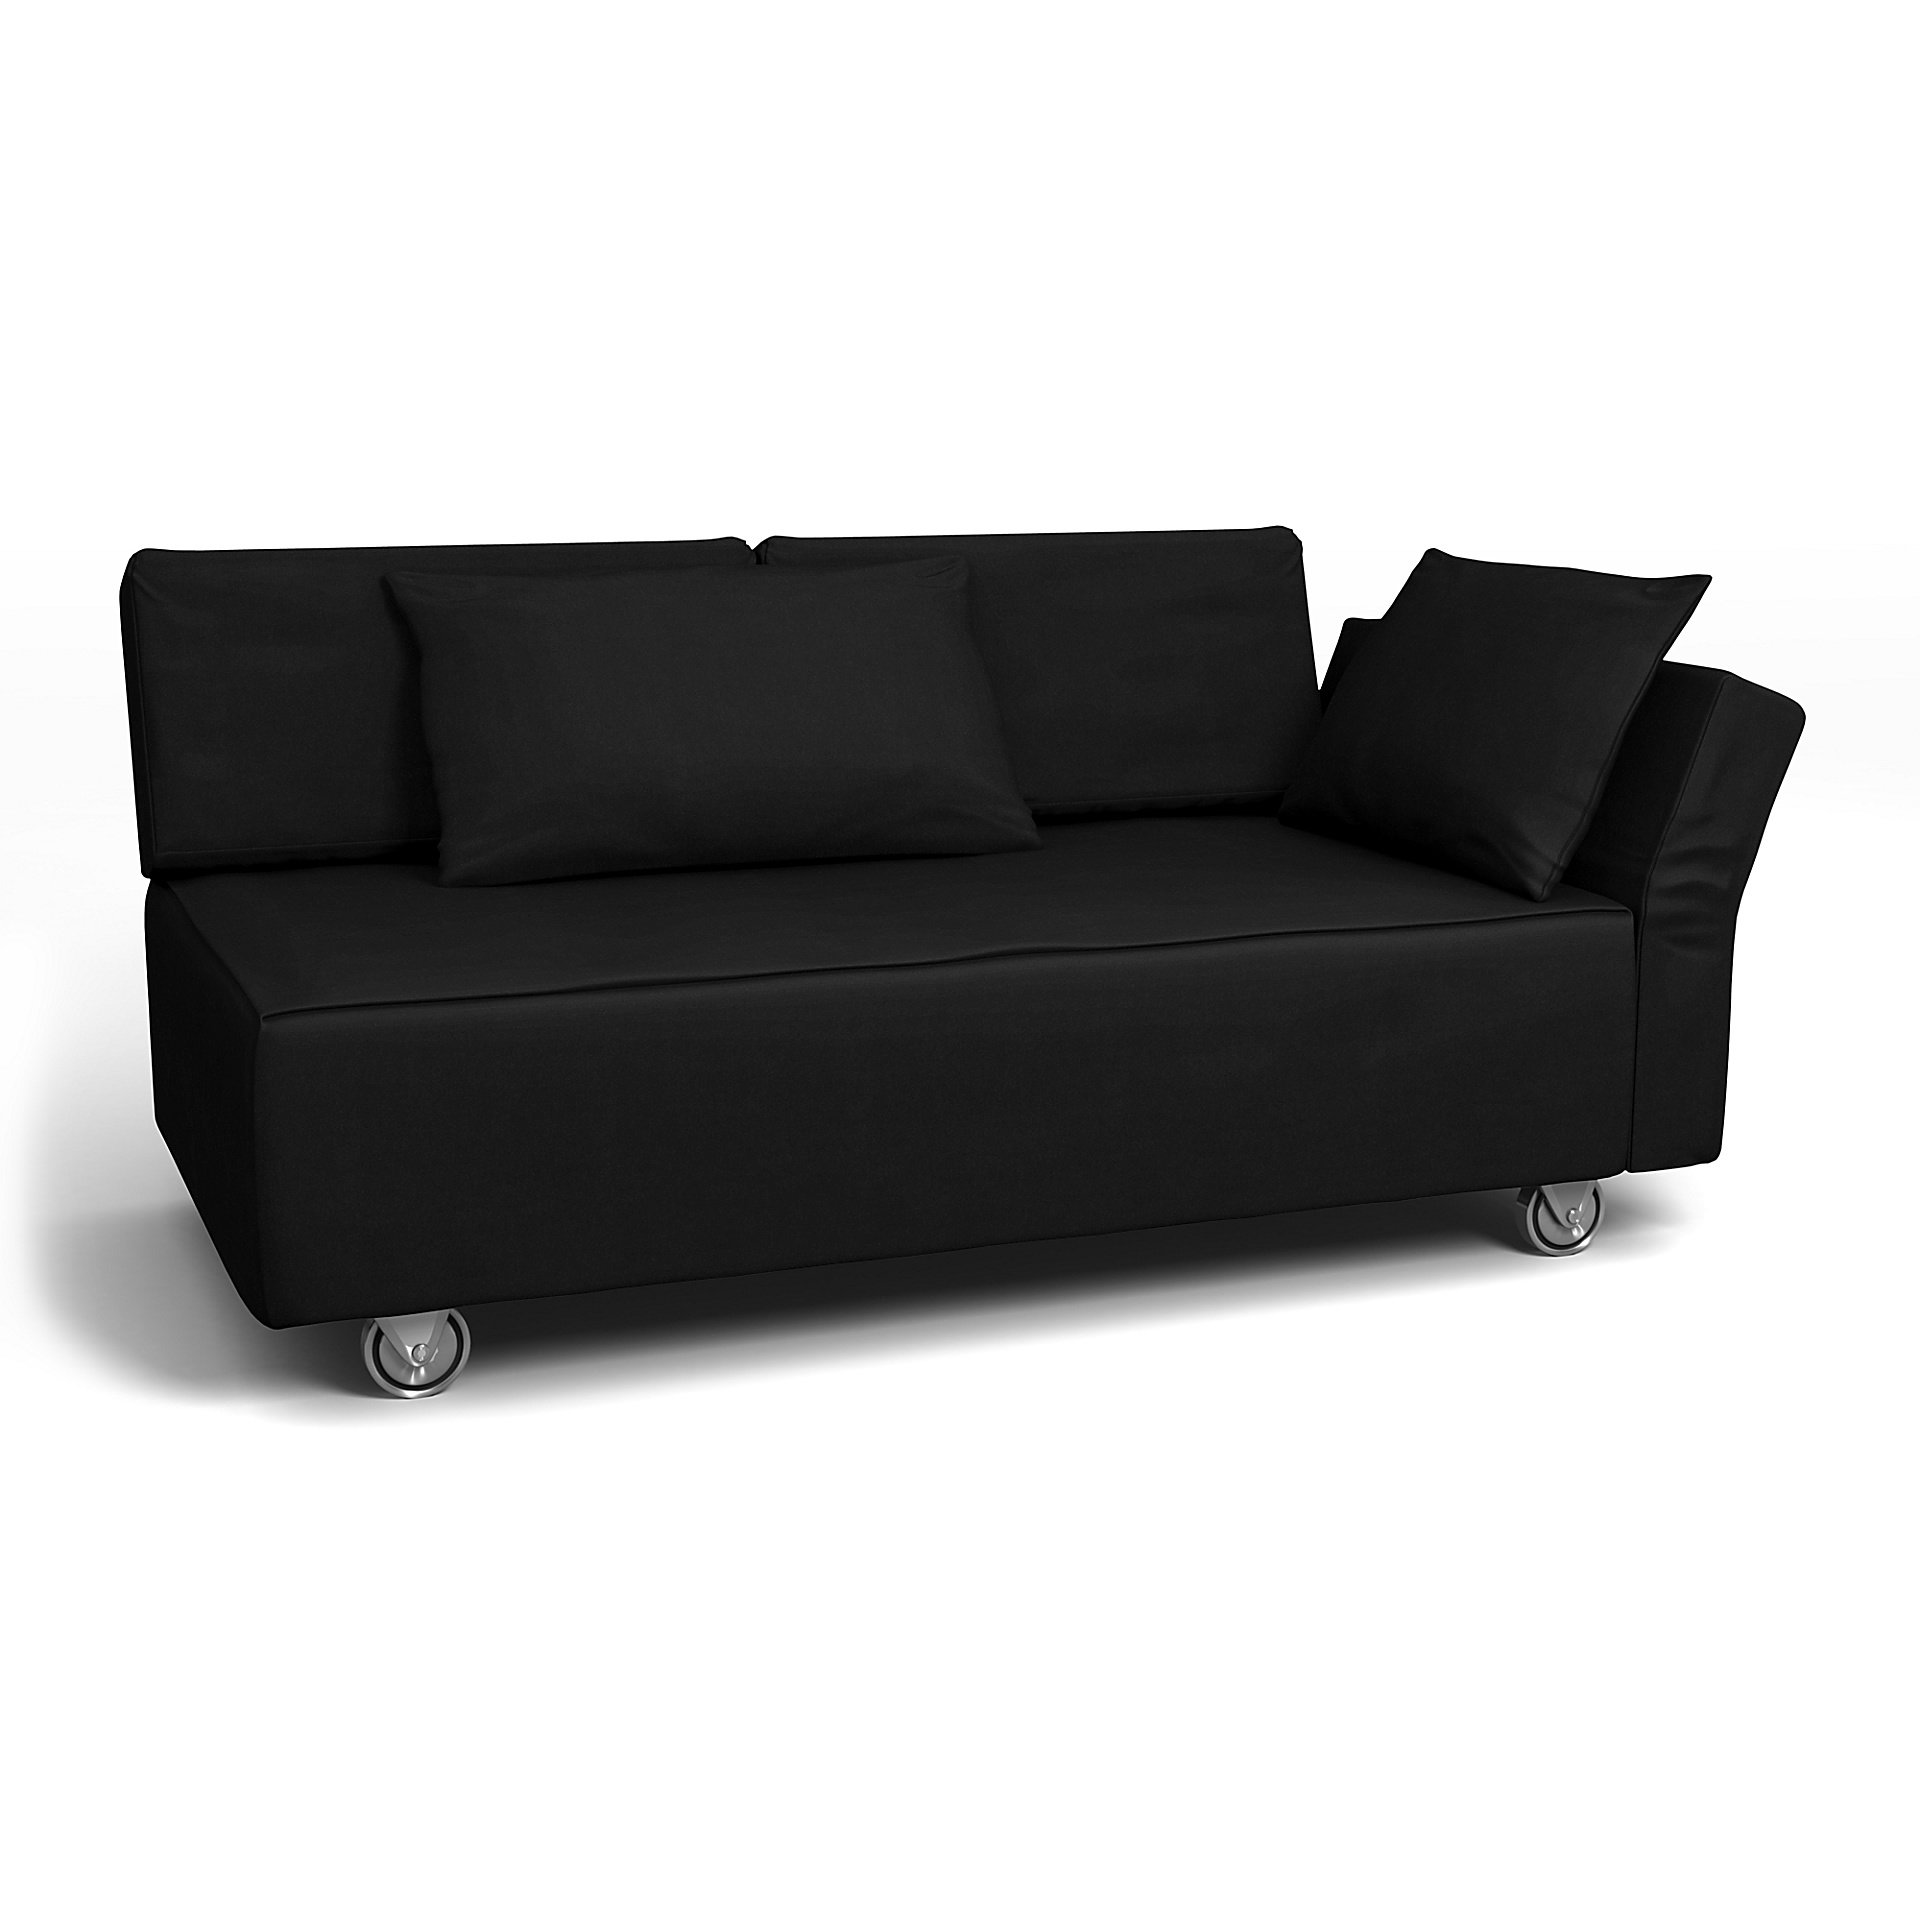 IKEA - Falsterbo 2 Seat Sofa with Right Arm Cover, Black, Velvet - Bemz